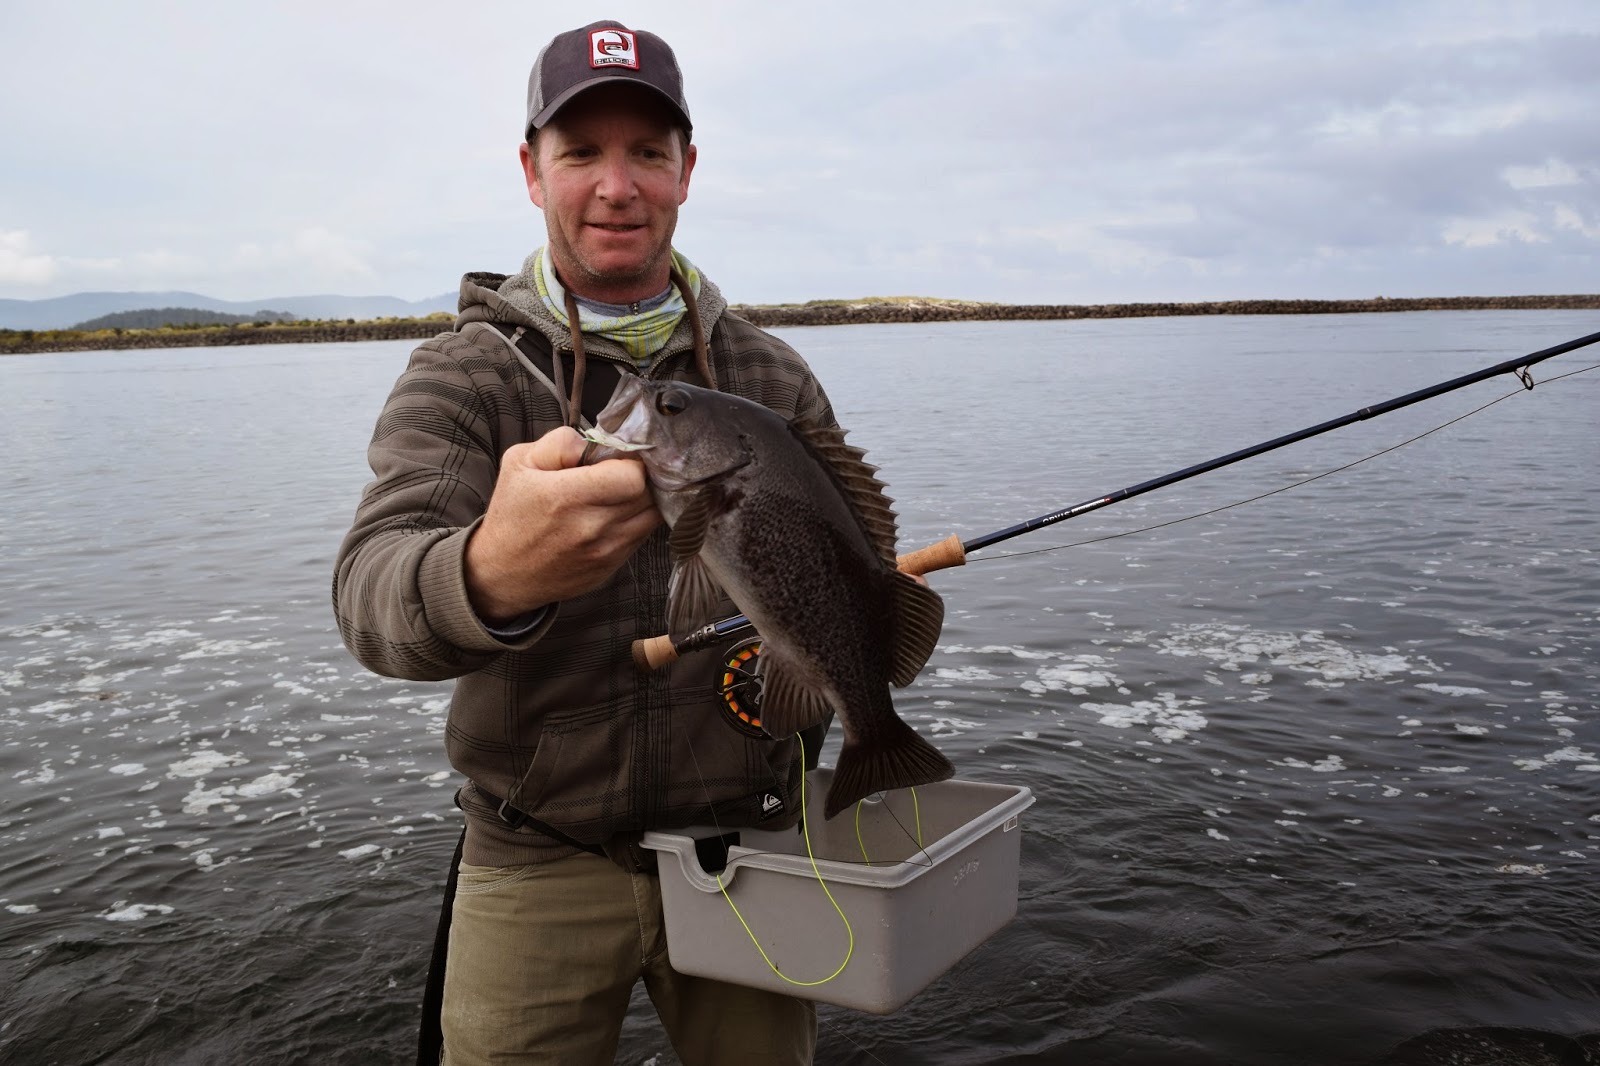 WFS 097 - Jetty Fishing with Brian Marz - Fly Fishing, Lingcod